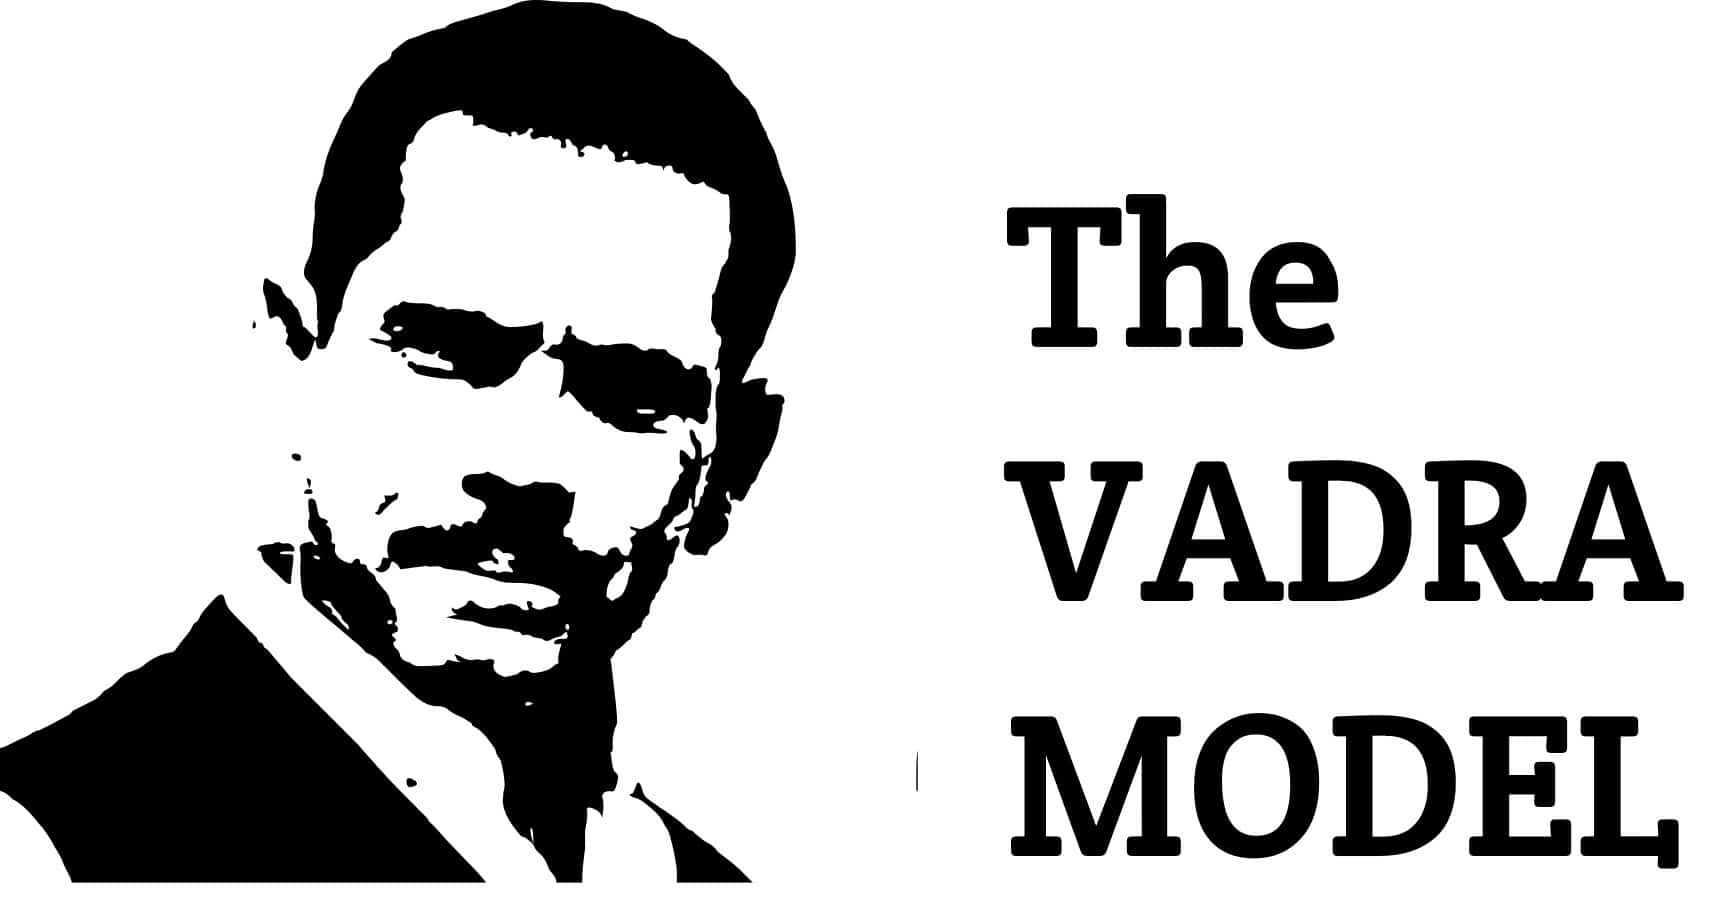                               The VADRA LOOTING MODEL of Making Money by Stealing from Poor Farmers                             
                              